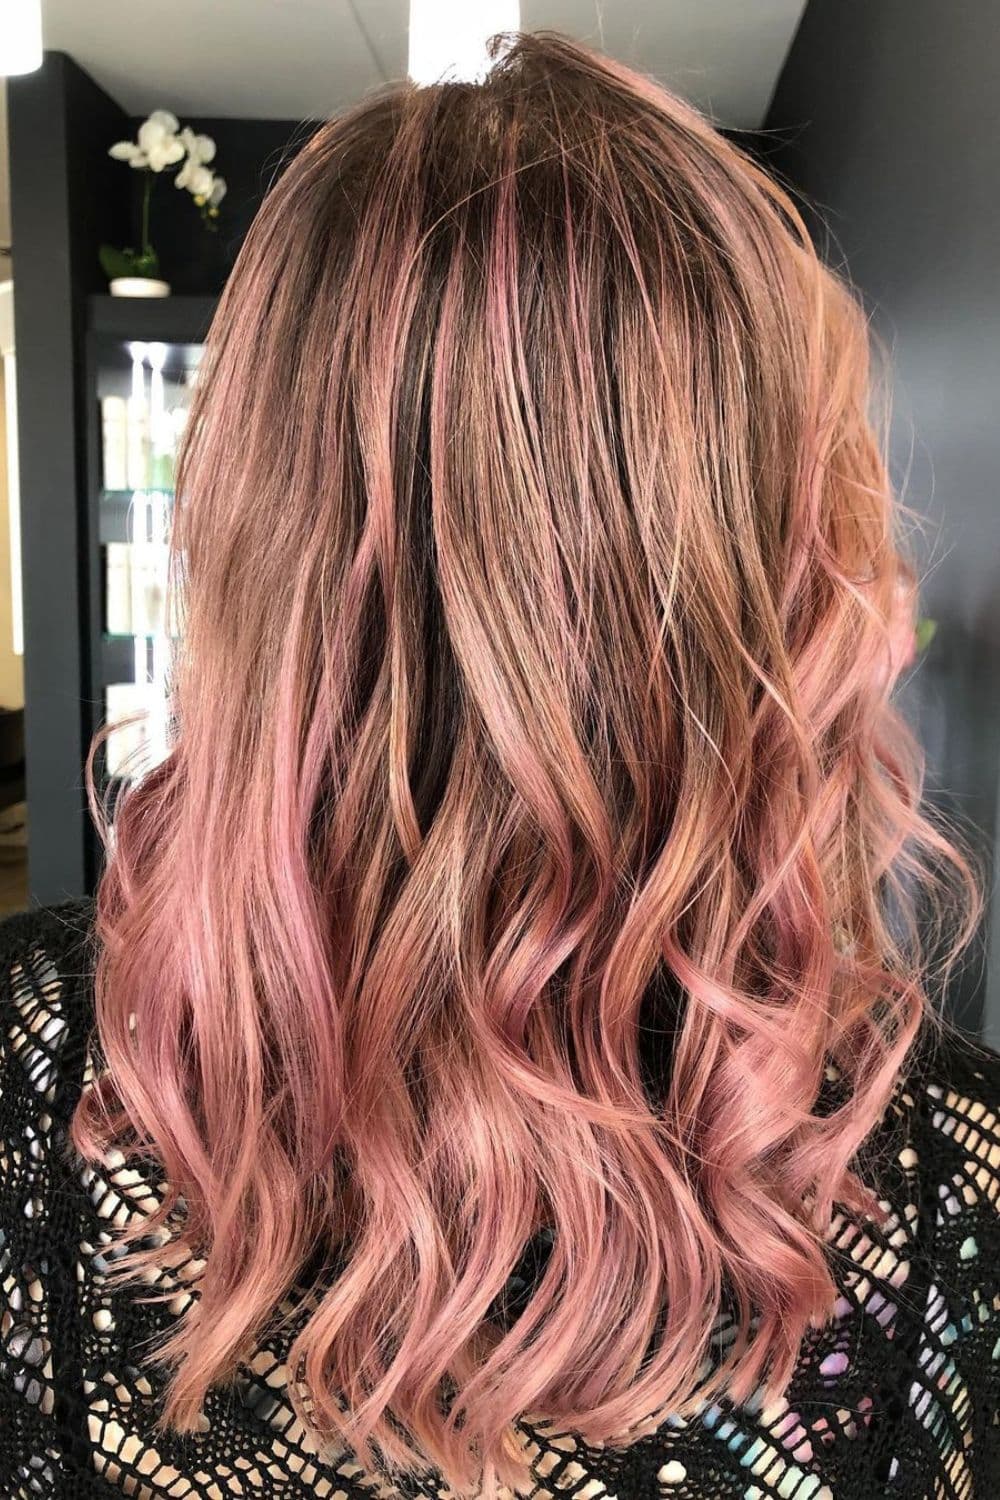 A woman with medium-length dusty pink balayage with curls.